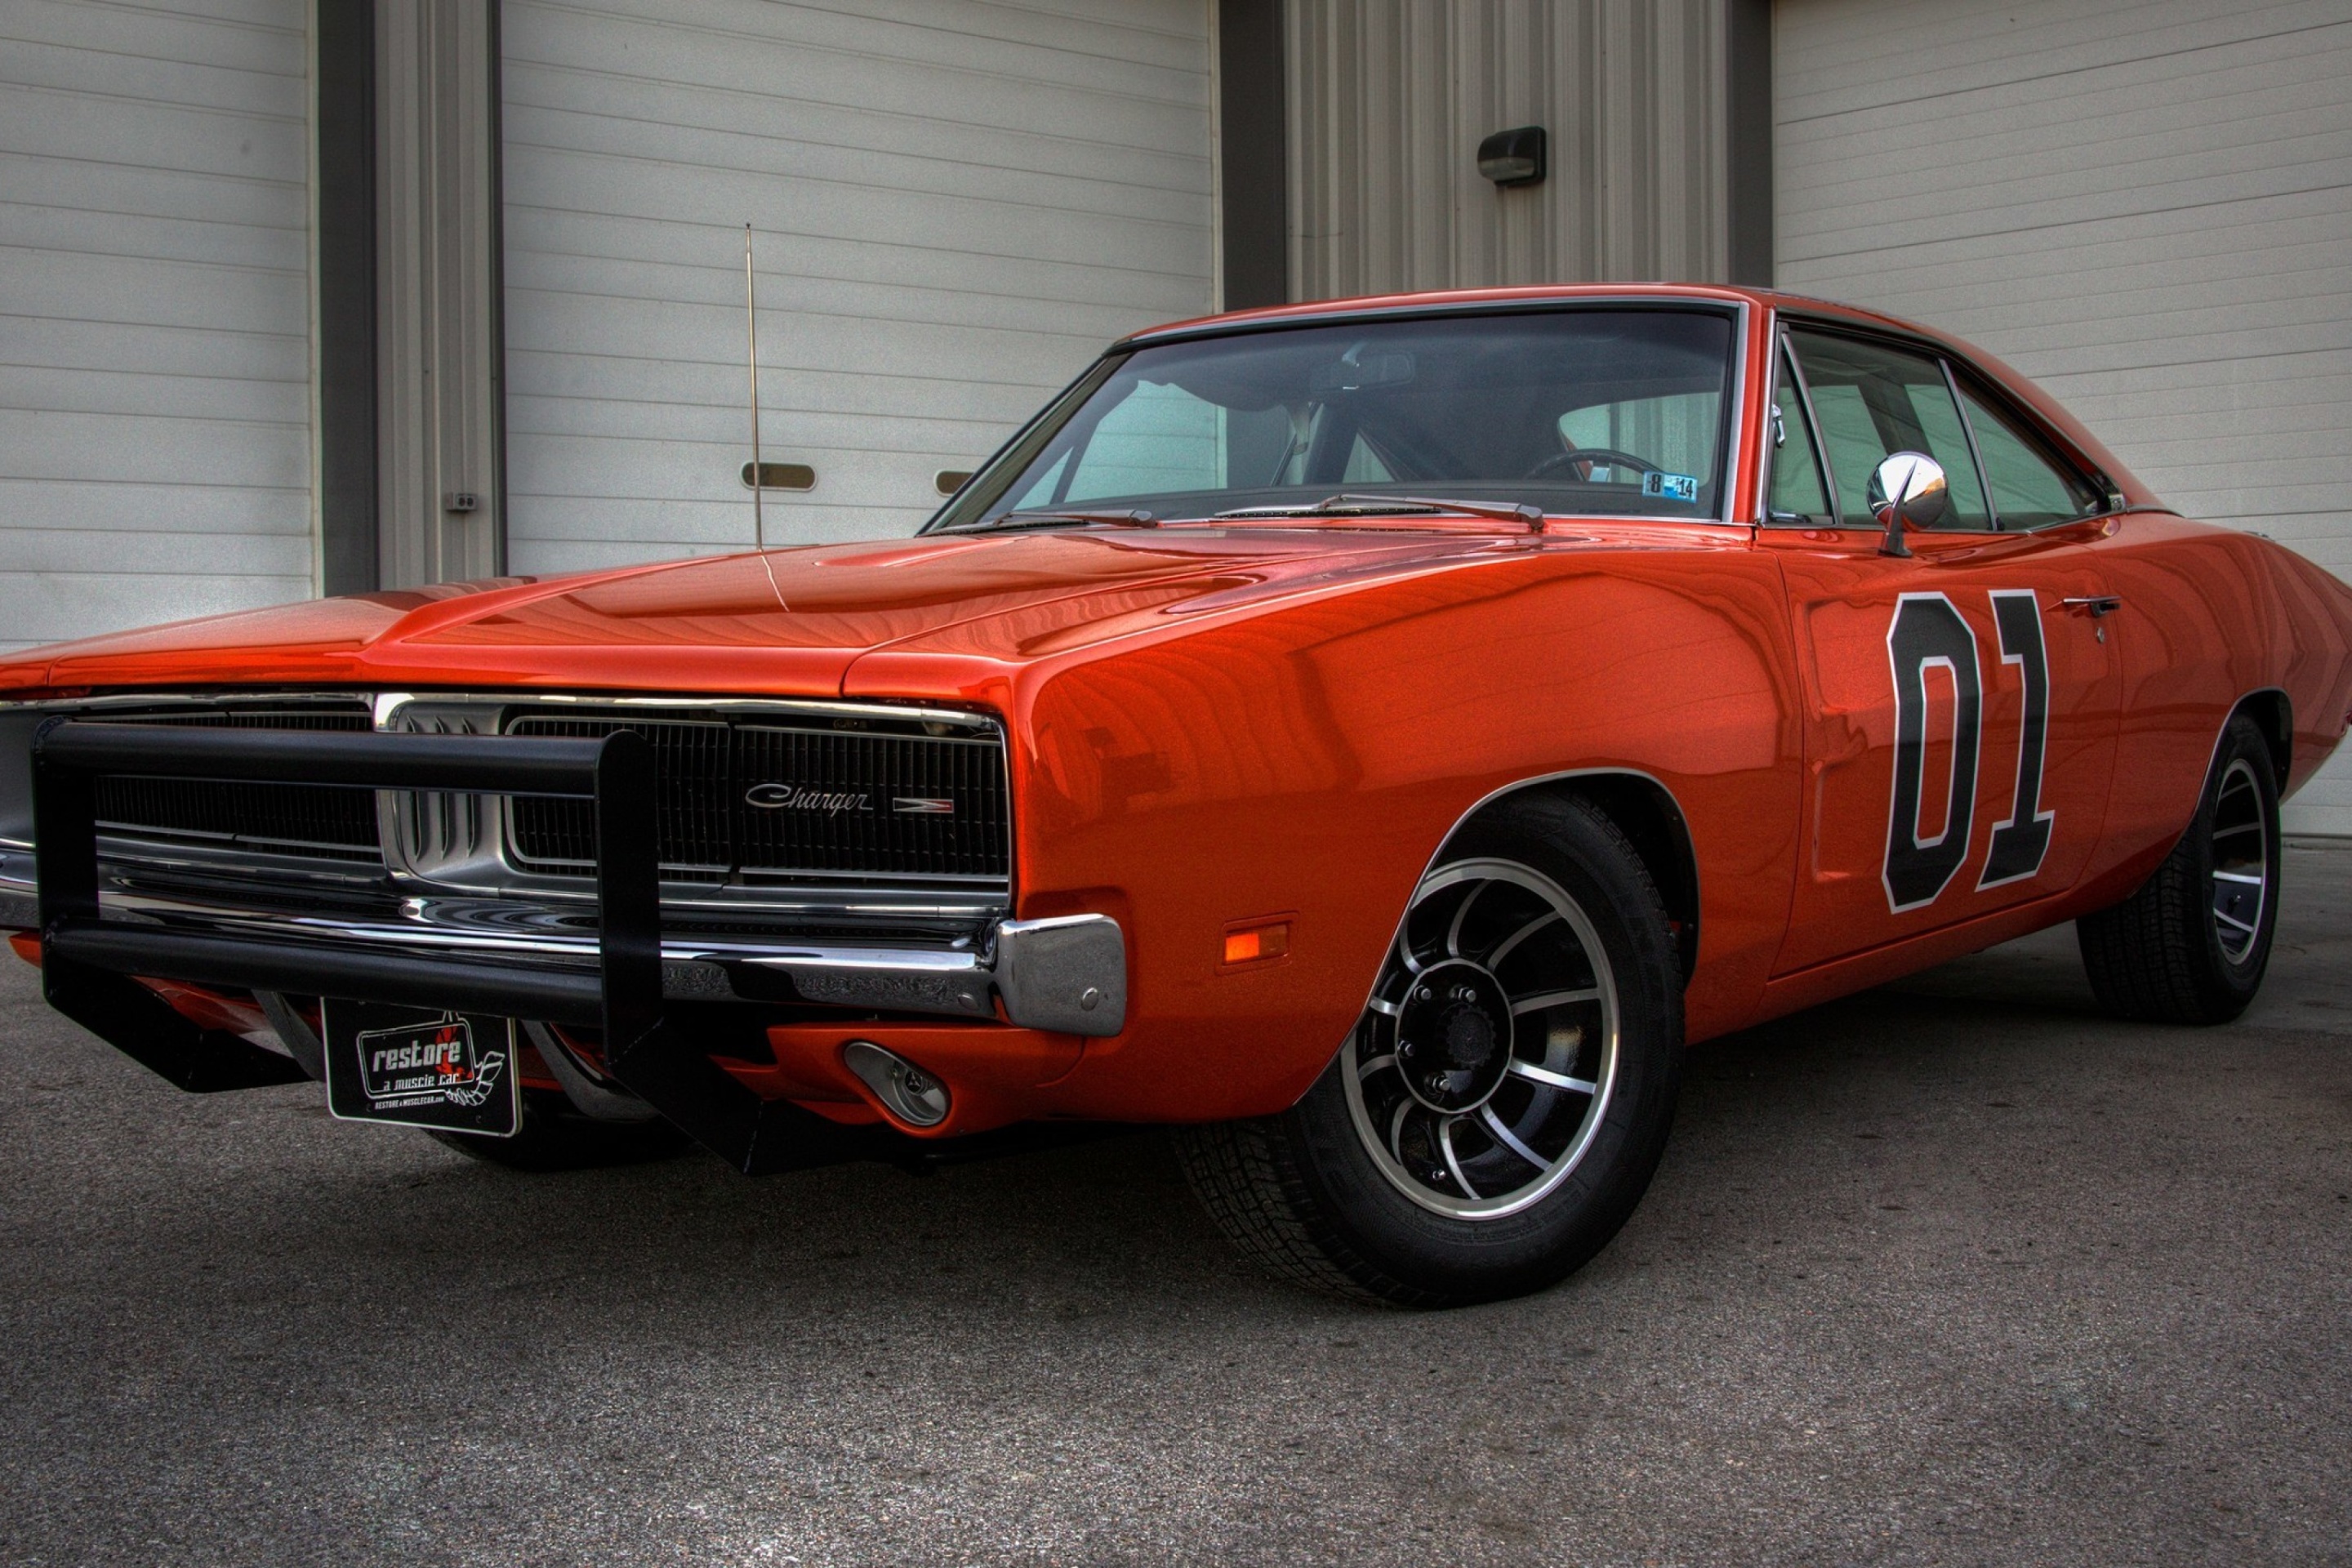 1969 Dodge Charger wallpaper 2880x1920